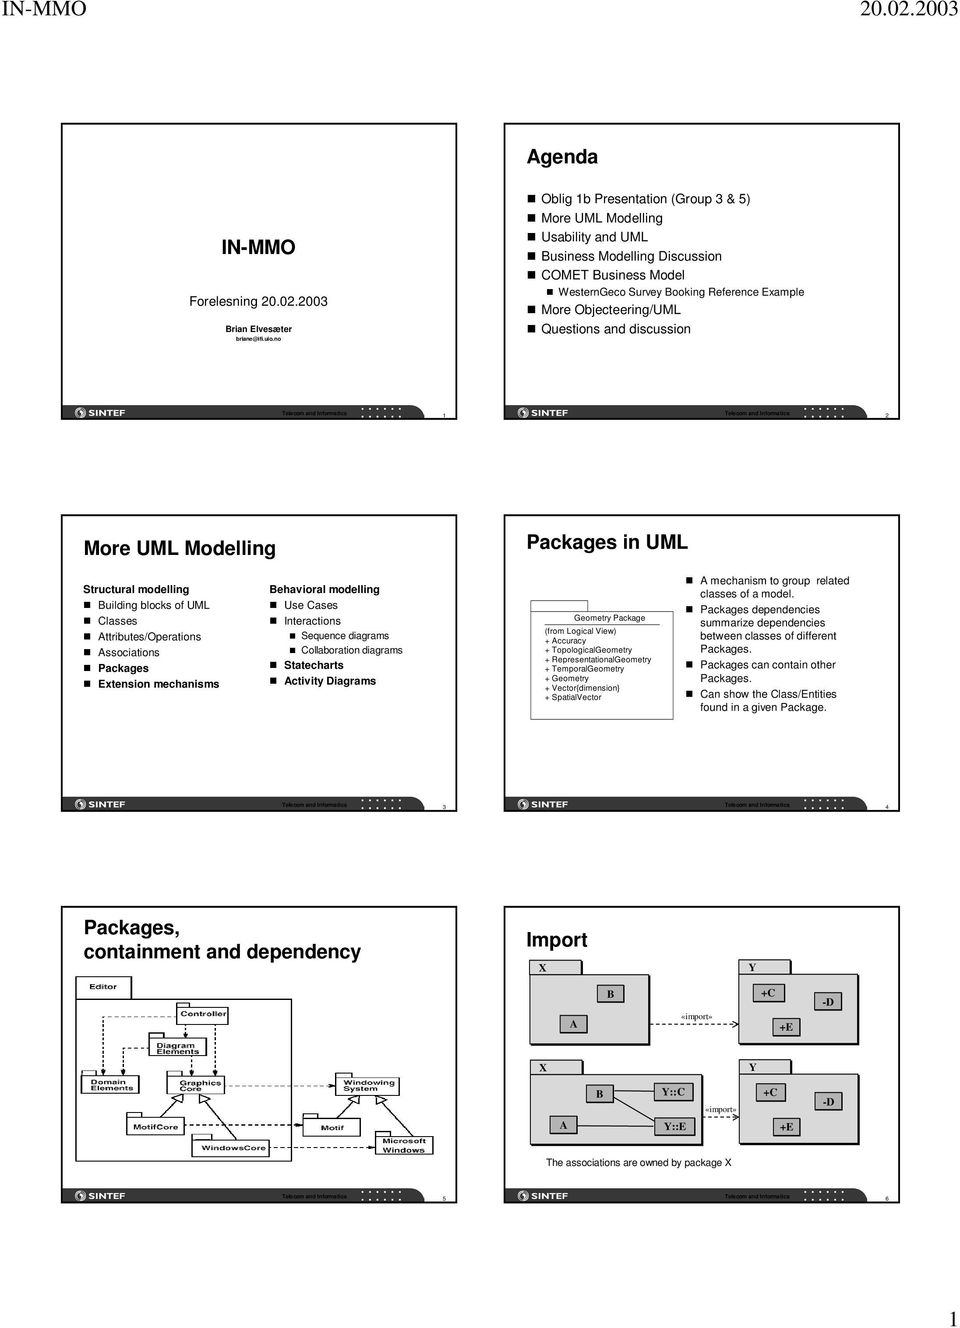 Questions and discussion 2 More UML Modelling Packages in UML Structural modelling Building blocks of UML Classes Attributes/Operations Associations Packages Extension mechanisms Behavioral modelling